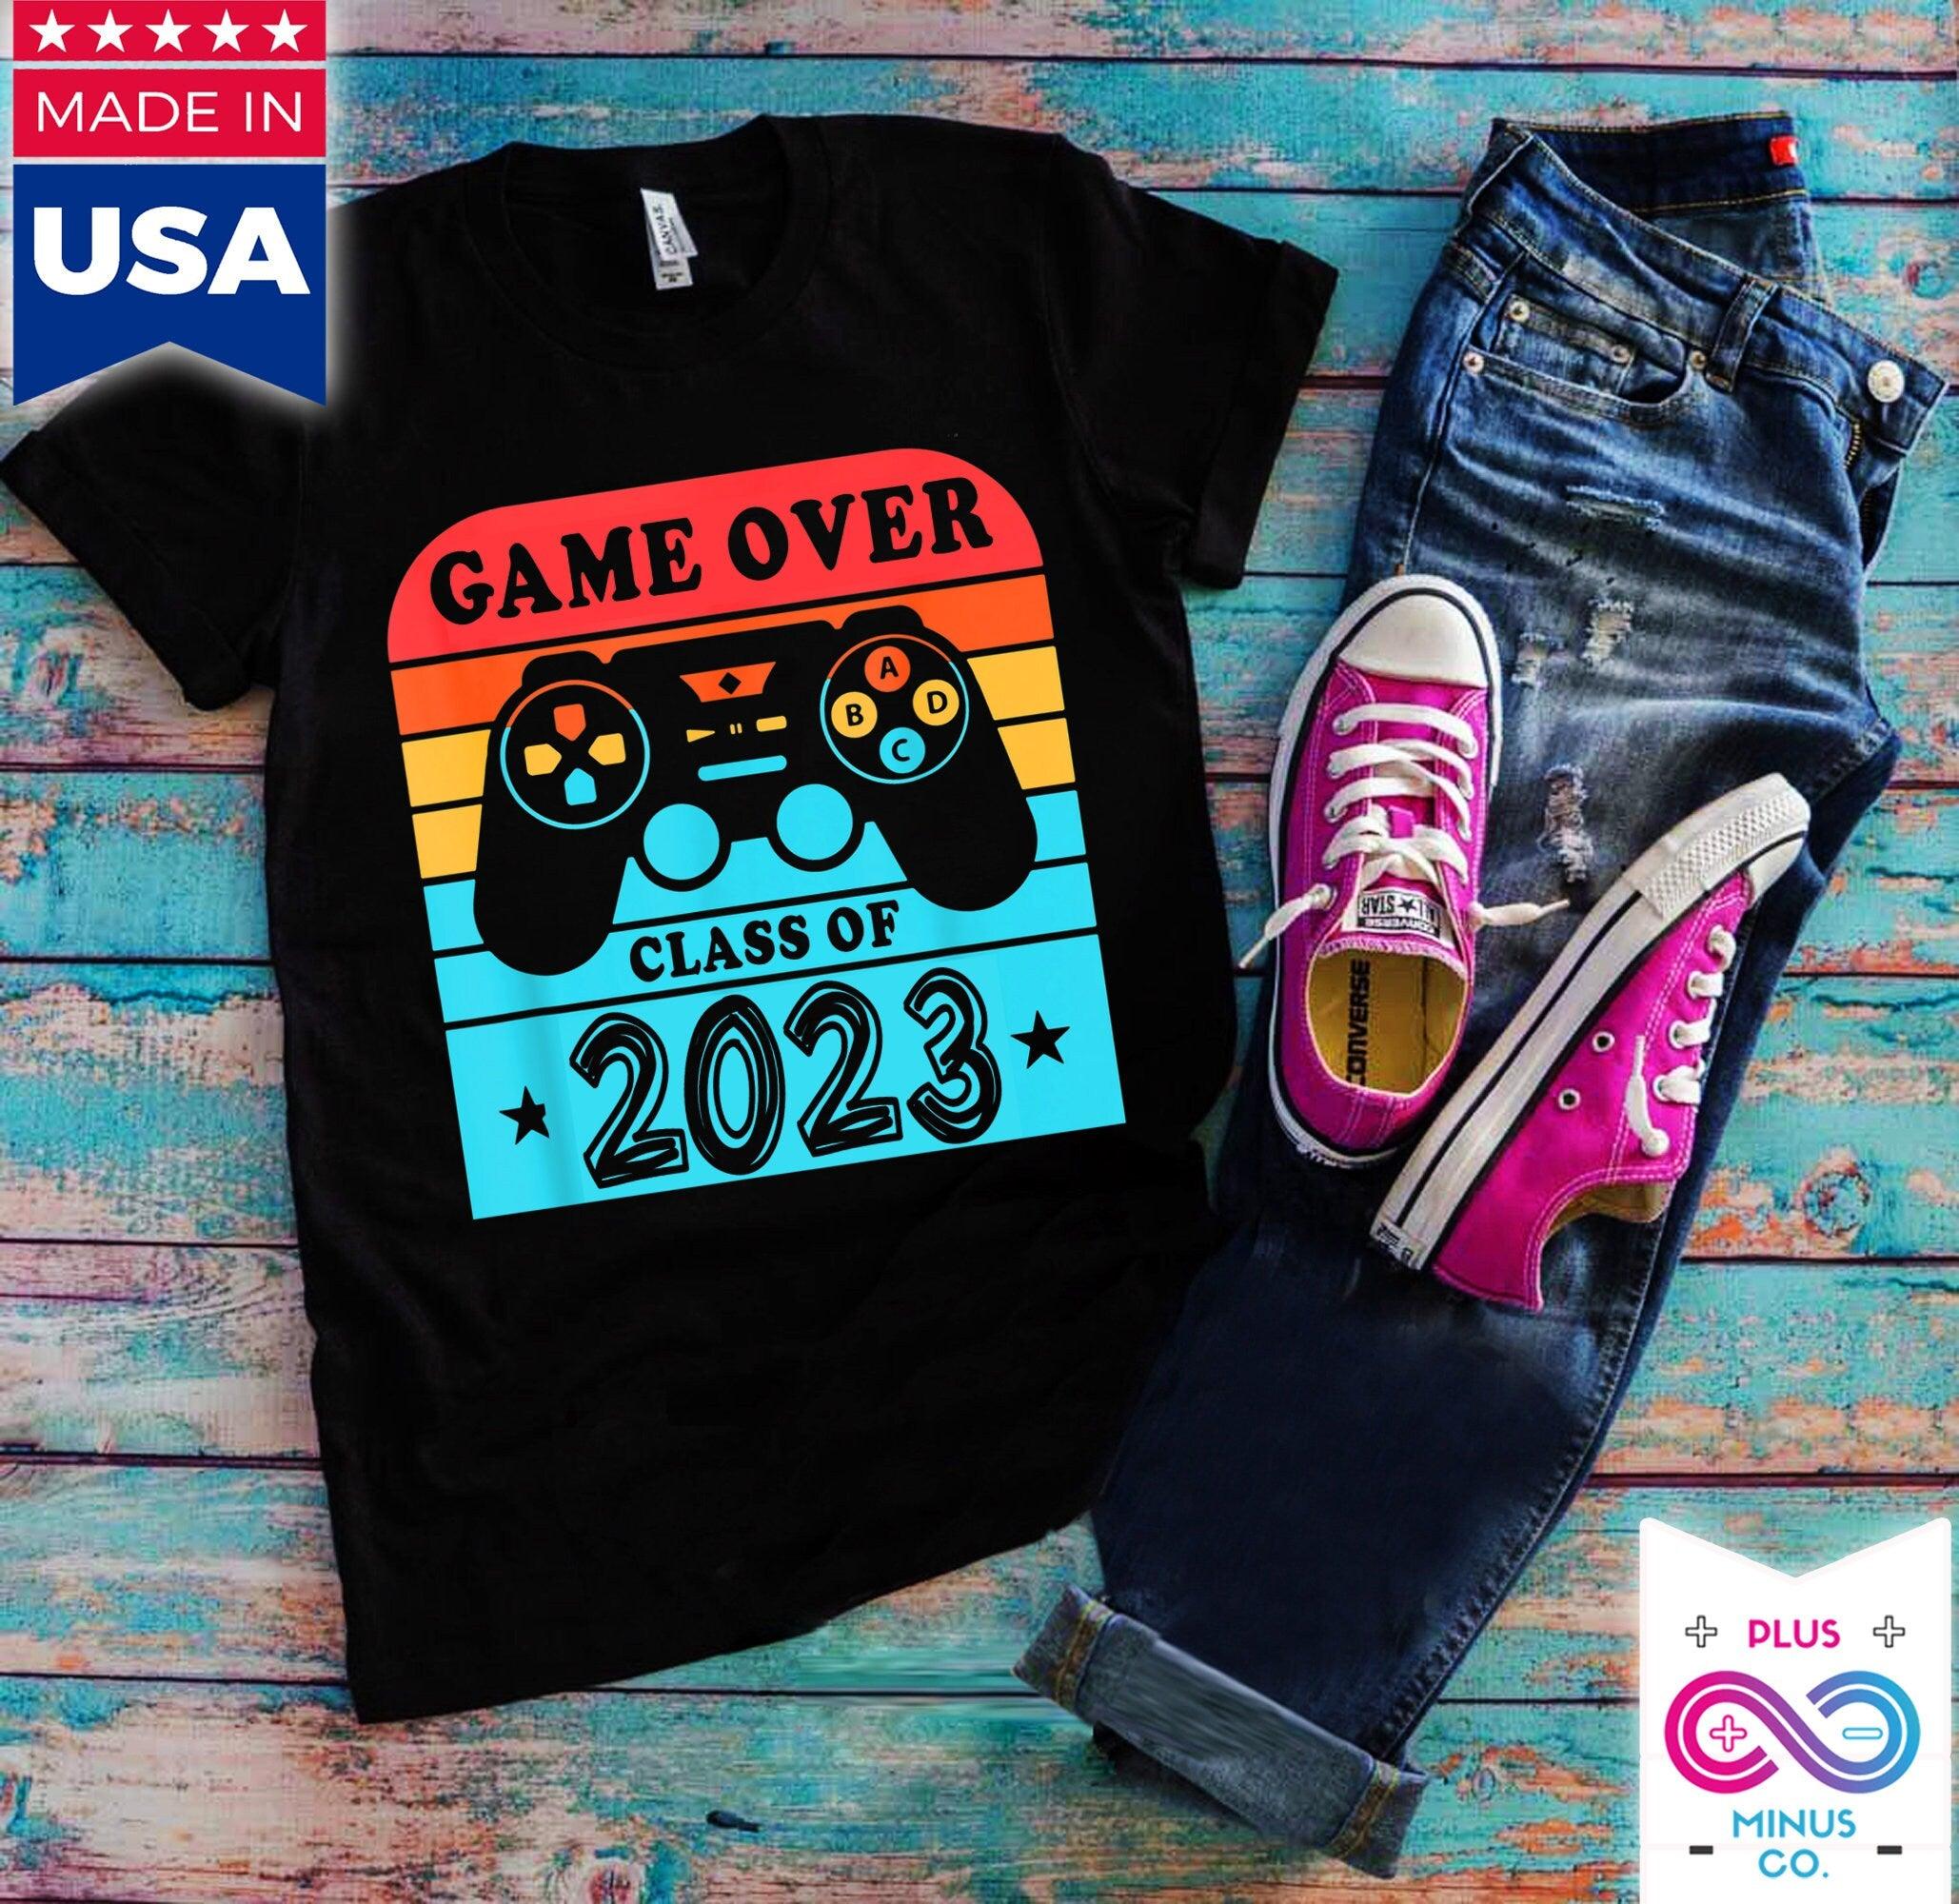 Game Over Class of 2023 T-Shirts, College-Abschlussgeschenk, Class Of 2023 T-Shirt, Senior Shirt, Geschenk für den Absolventen, Geschenk für sie, Senior Gaming – plusminusco.com